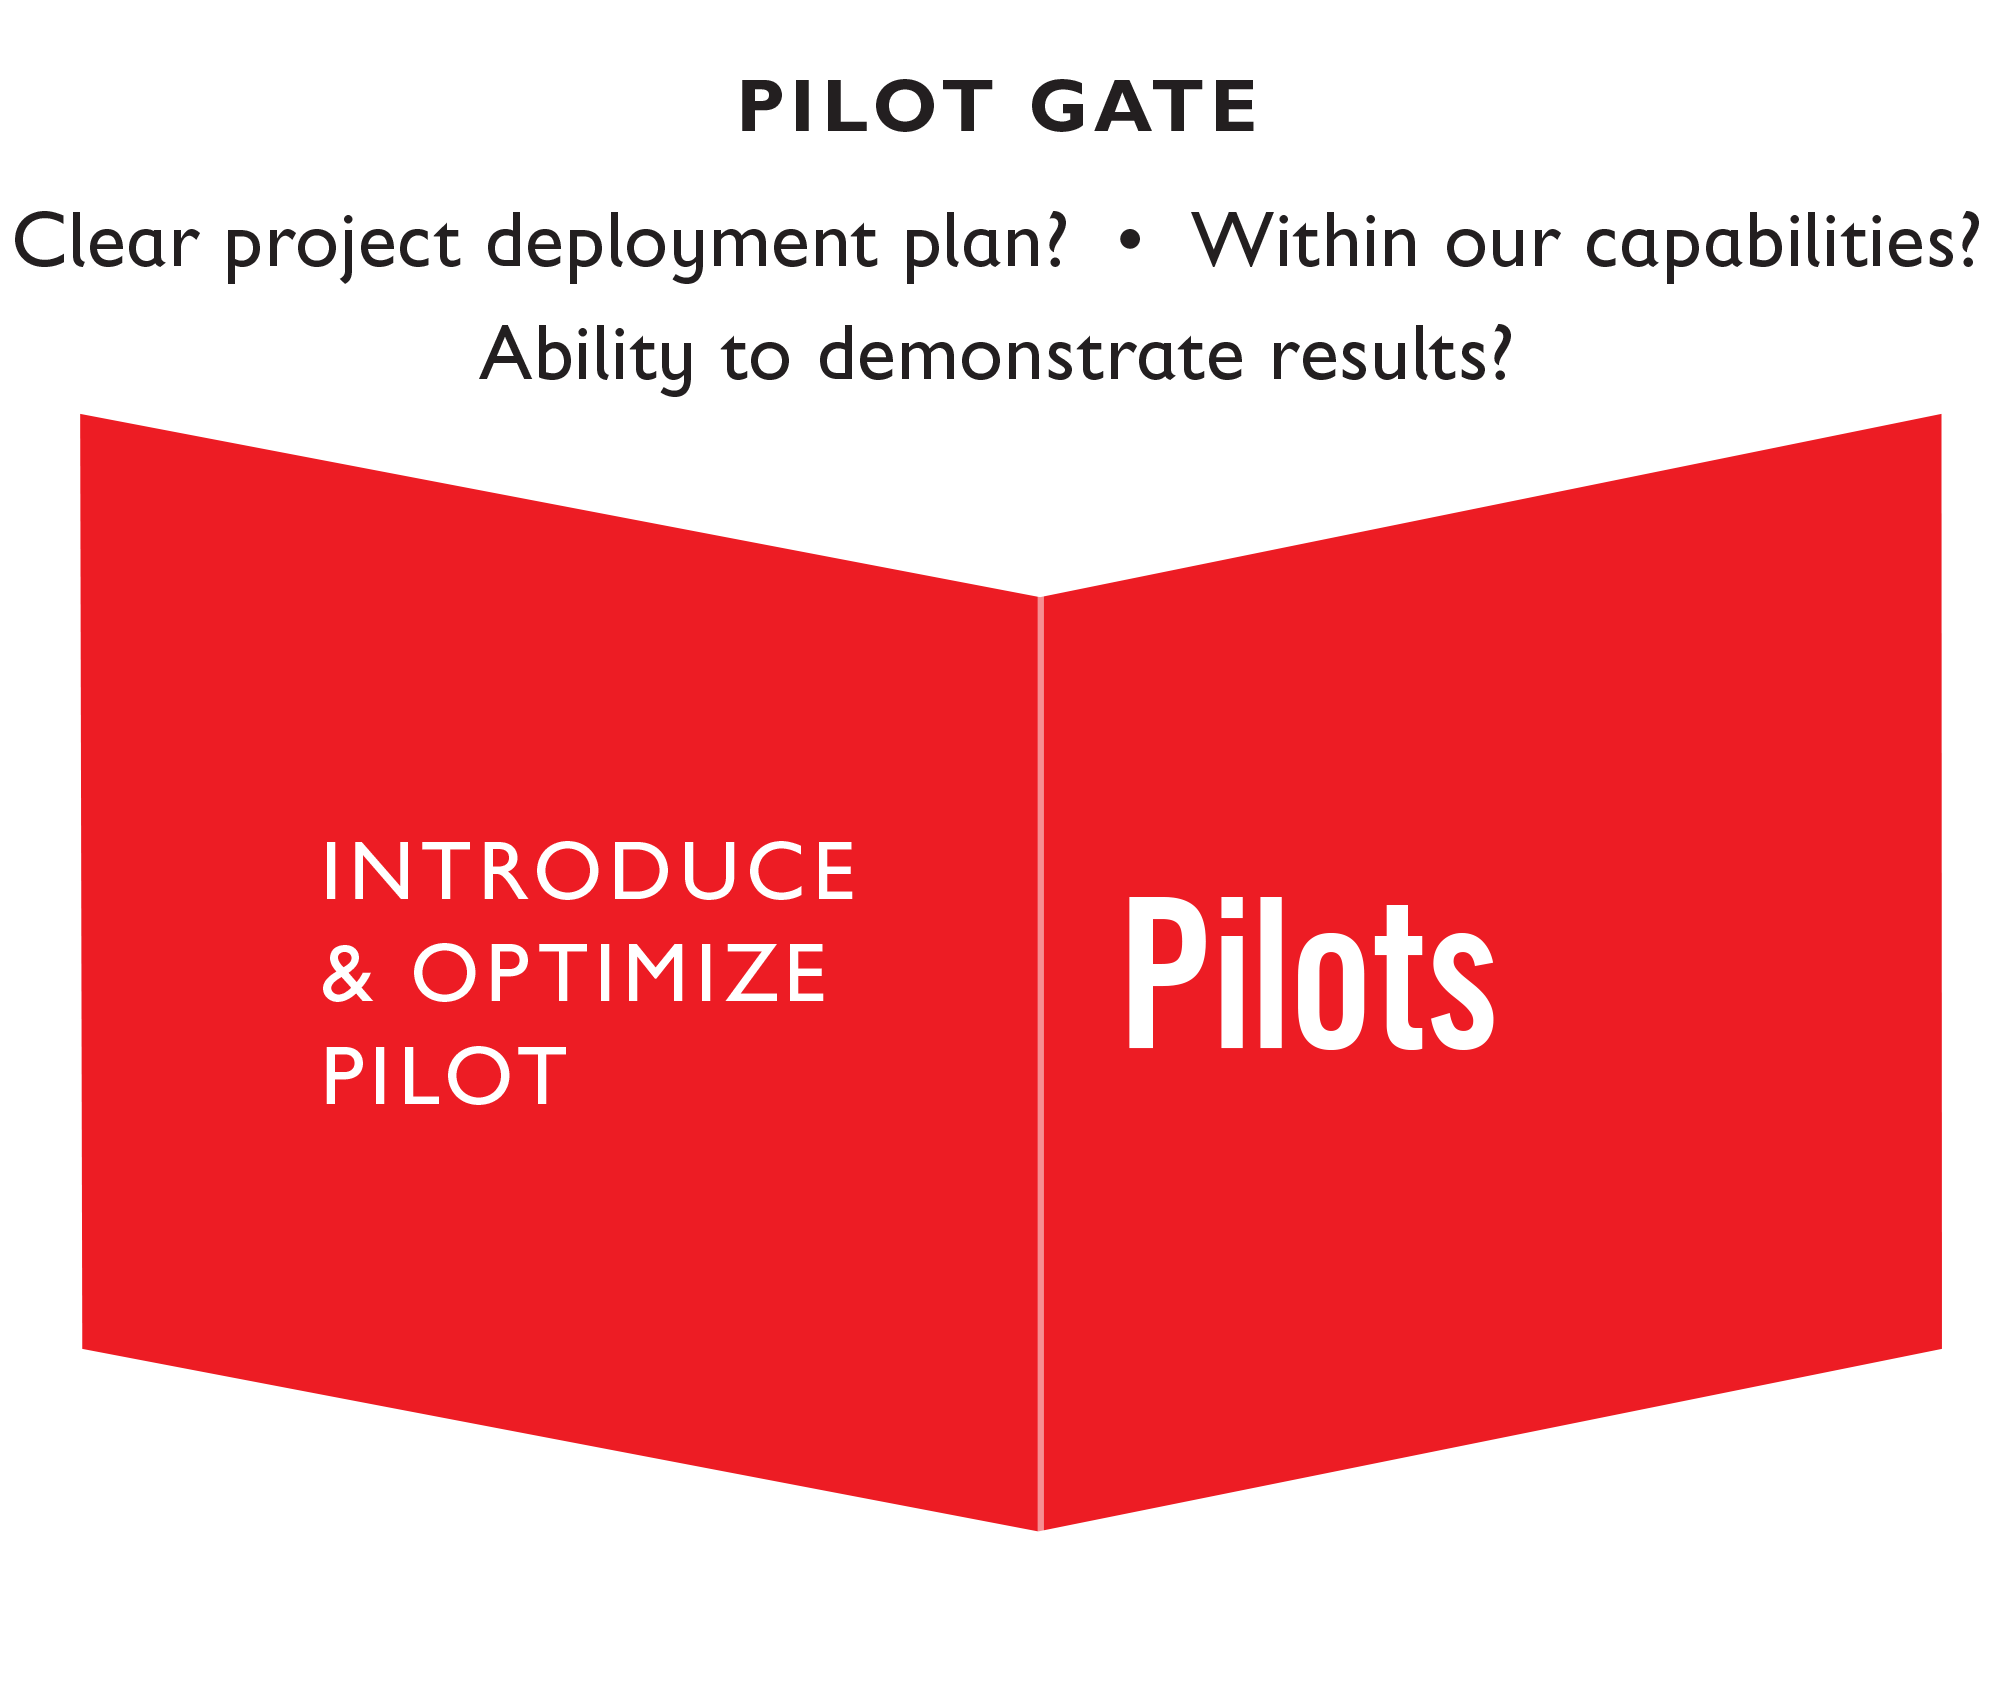 Pilot gate: To introduce and optimize pilots, it’s important to ask … Is there a clear project deployment plan? Is it within our capabilities? Do we have the ability to demonstrate results? 